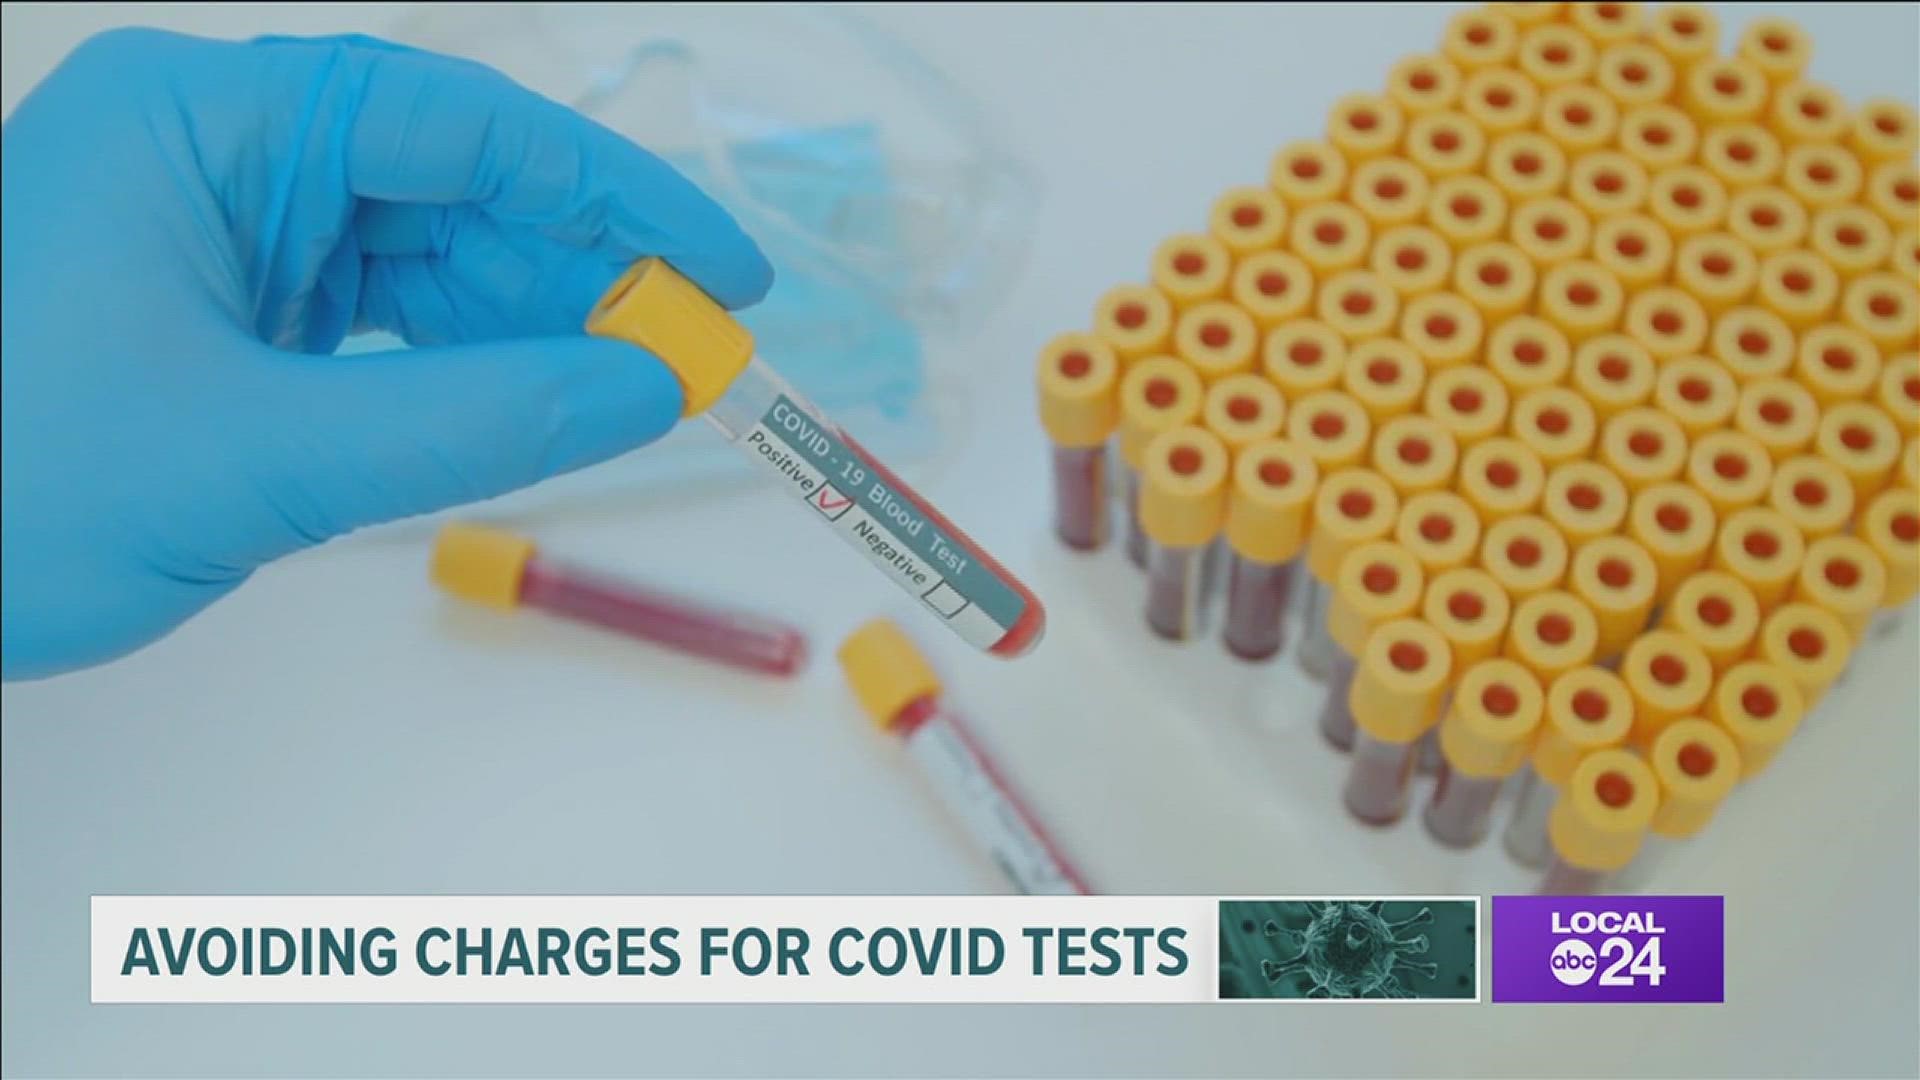 COVID tests are covered by the federal government, so it means no co-pays, no deductibles, and no co-insurance charges. But, facilities found ways to get around it.